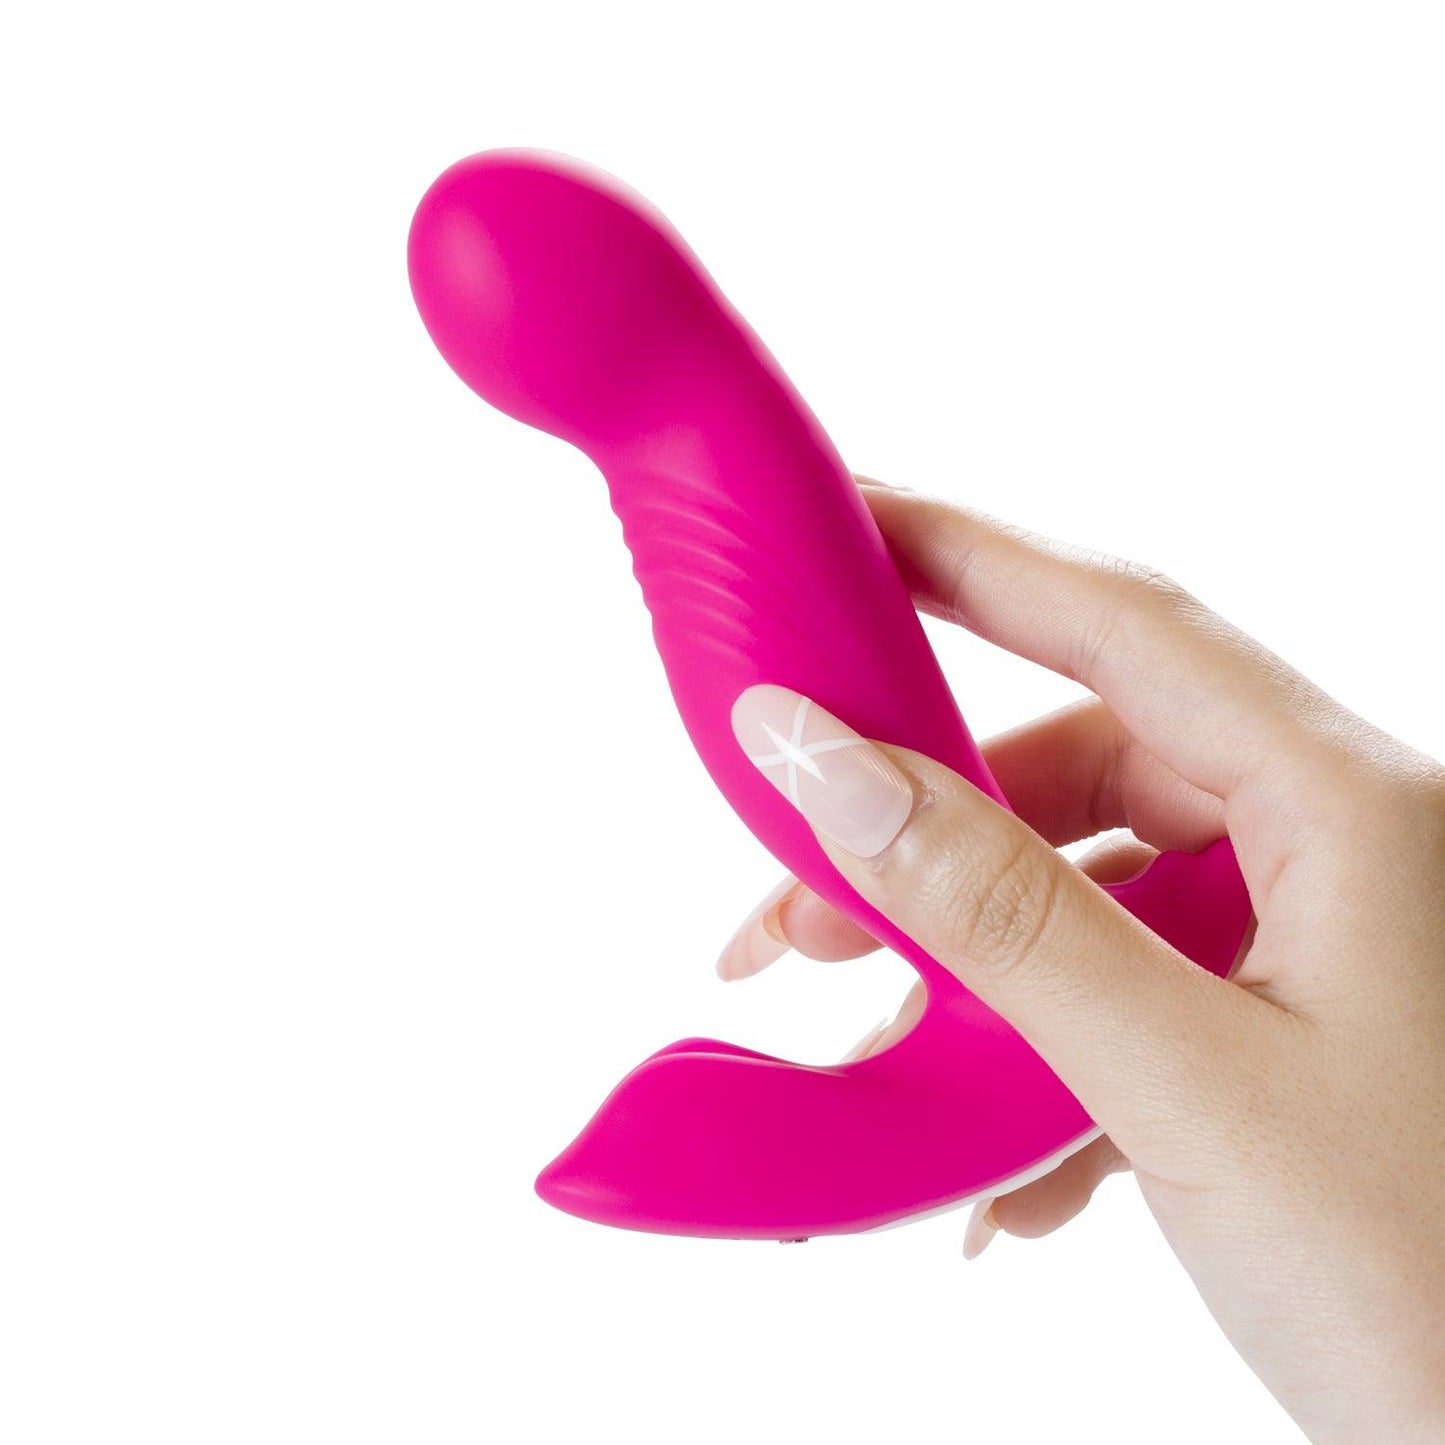 Crave - G-spot Vibrator with Rotating Head G-bliss O-maker Toy